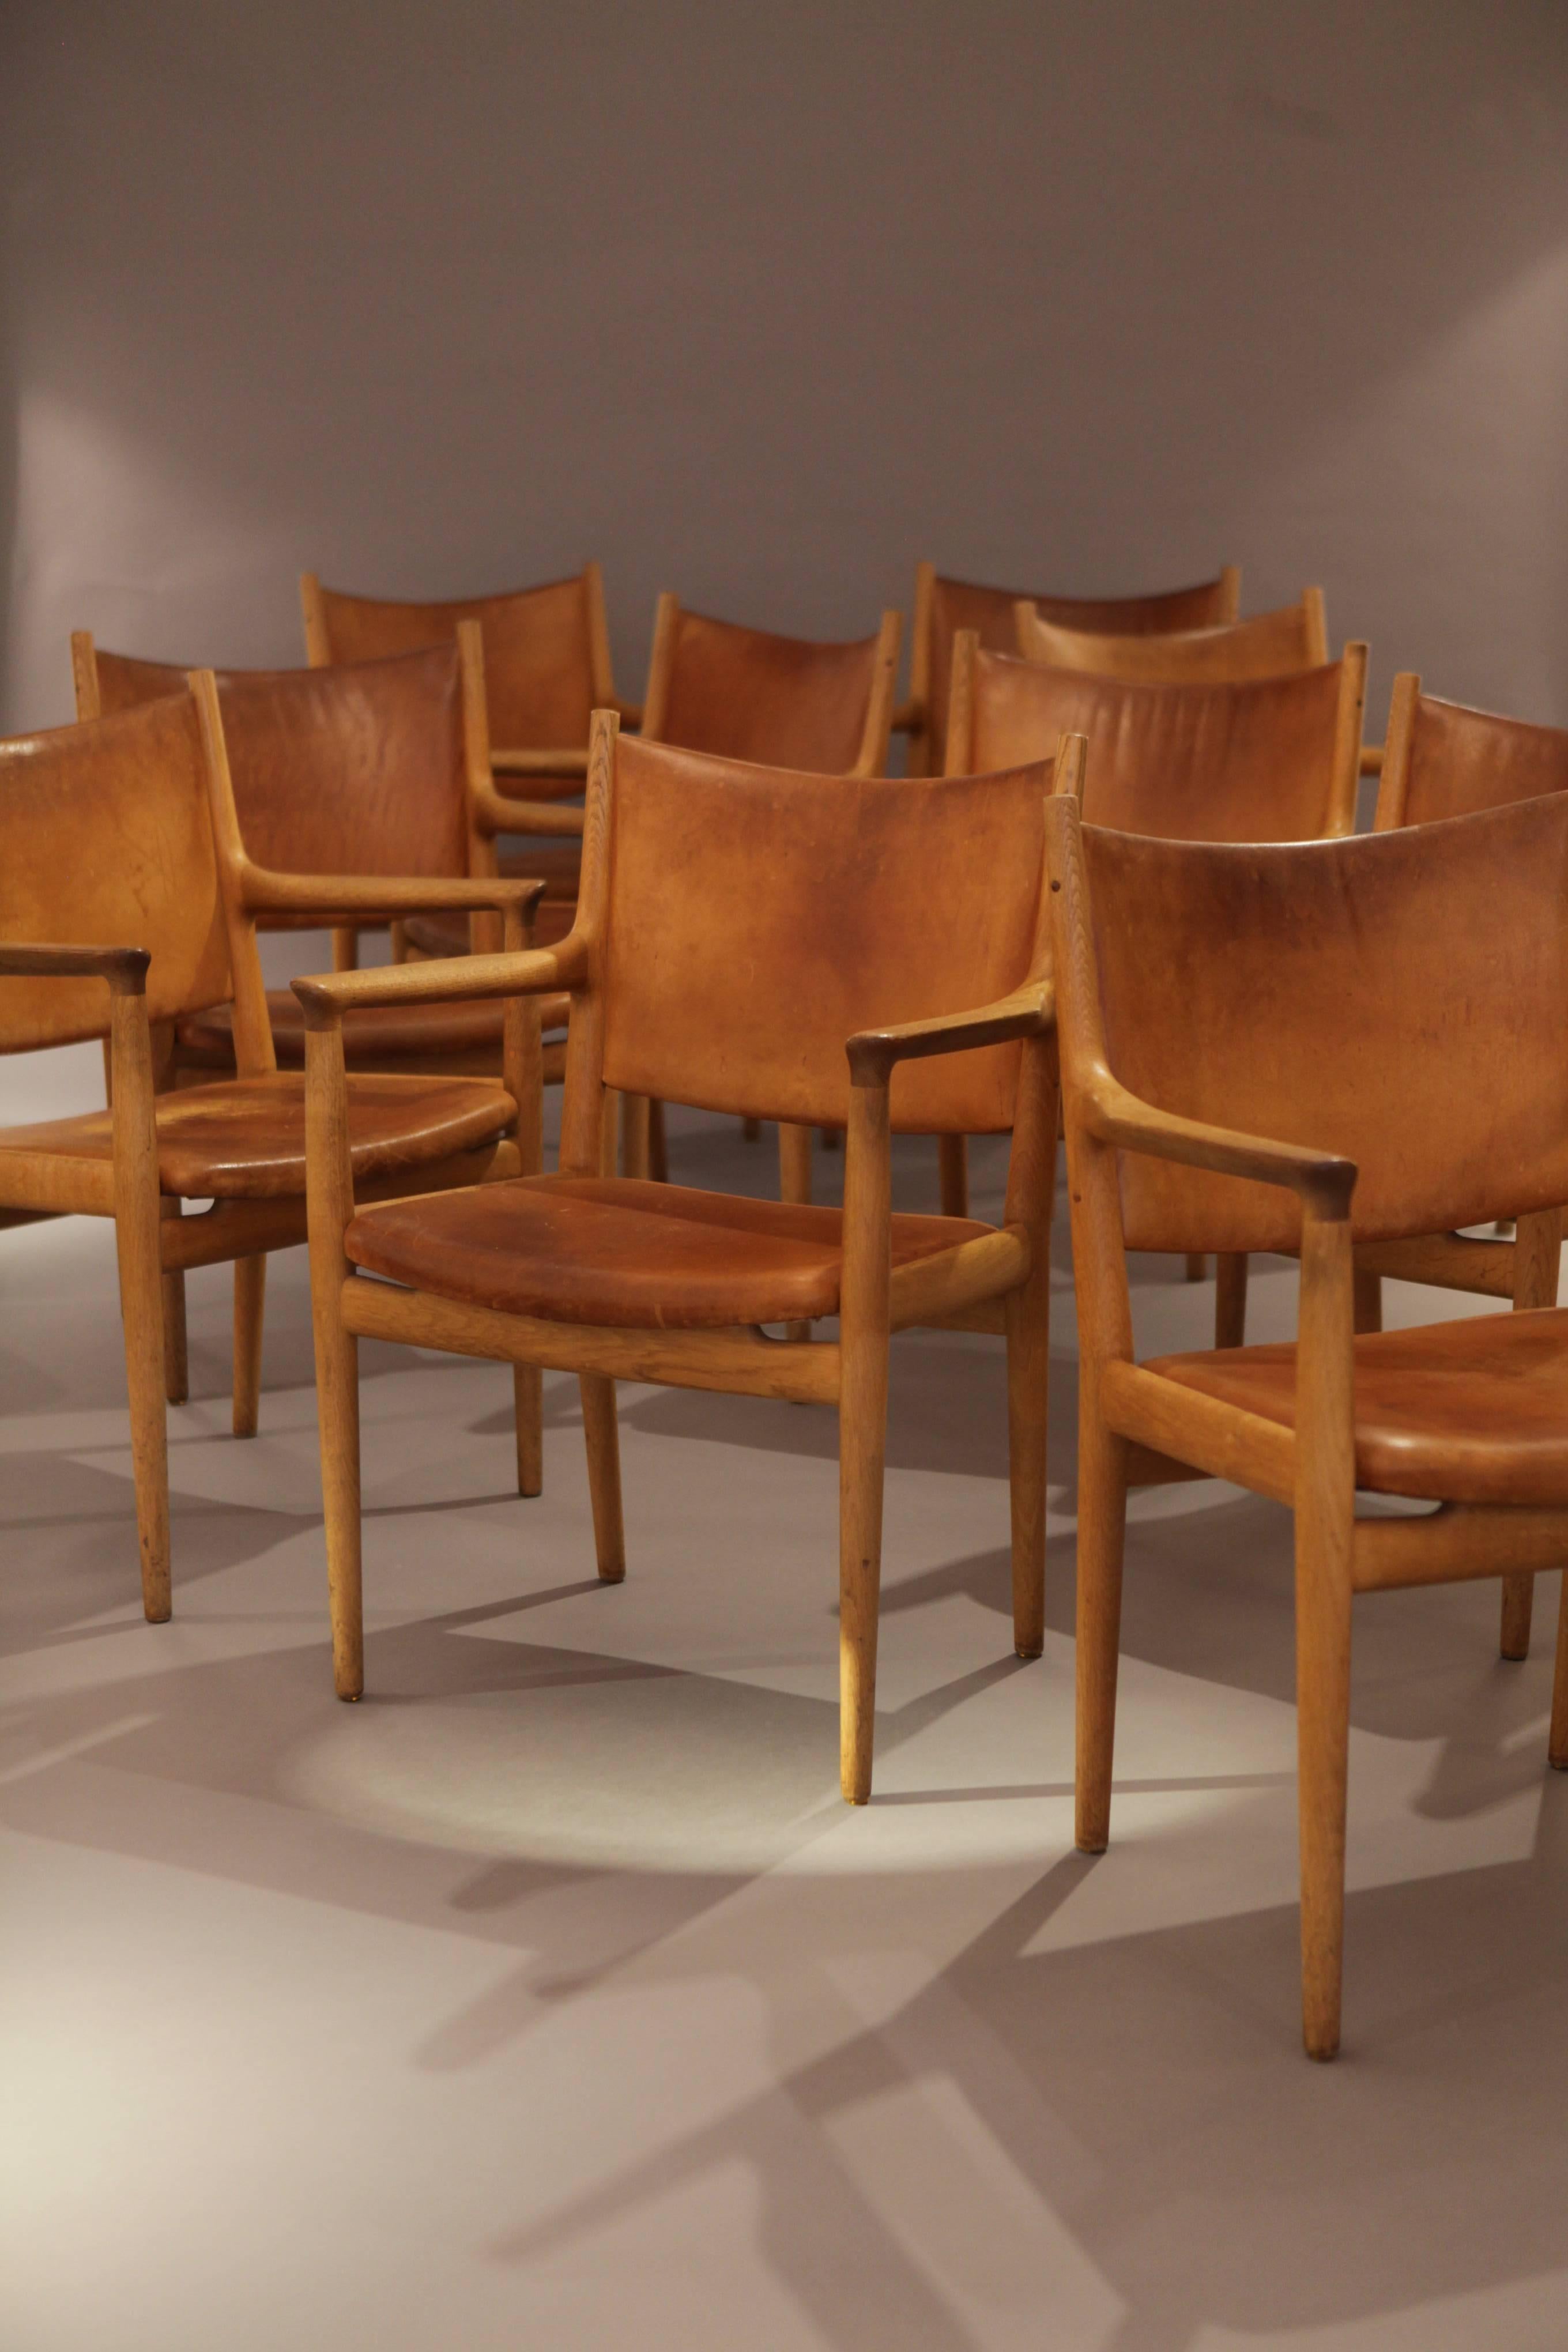 A set of ten rare and original Hans Wegner JH-713 Armchairs in original condition from 1960s, by Cabinetmaker Johannes Hansen, all signed with the original Manufacturers / Designers Metal Label.
Perfect vintage condition and patina to the old